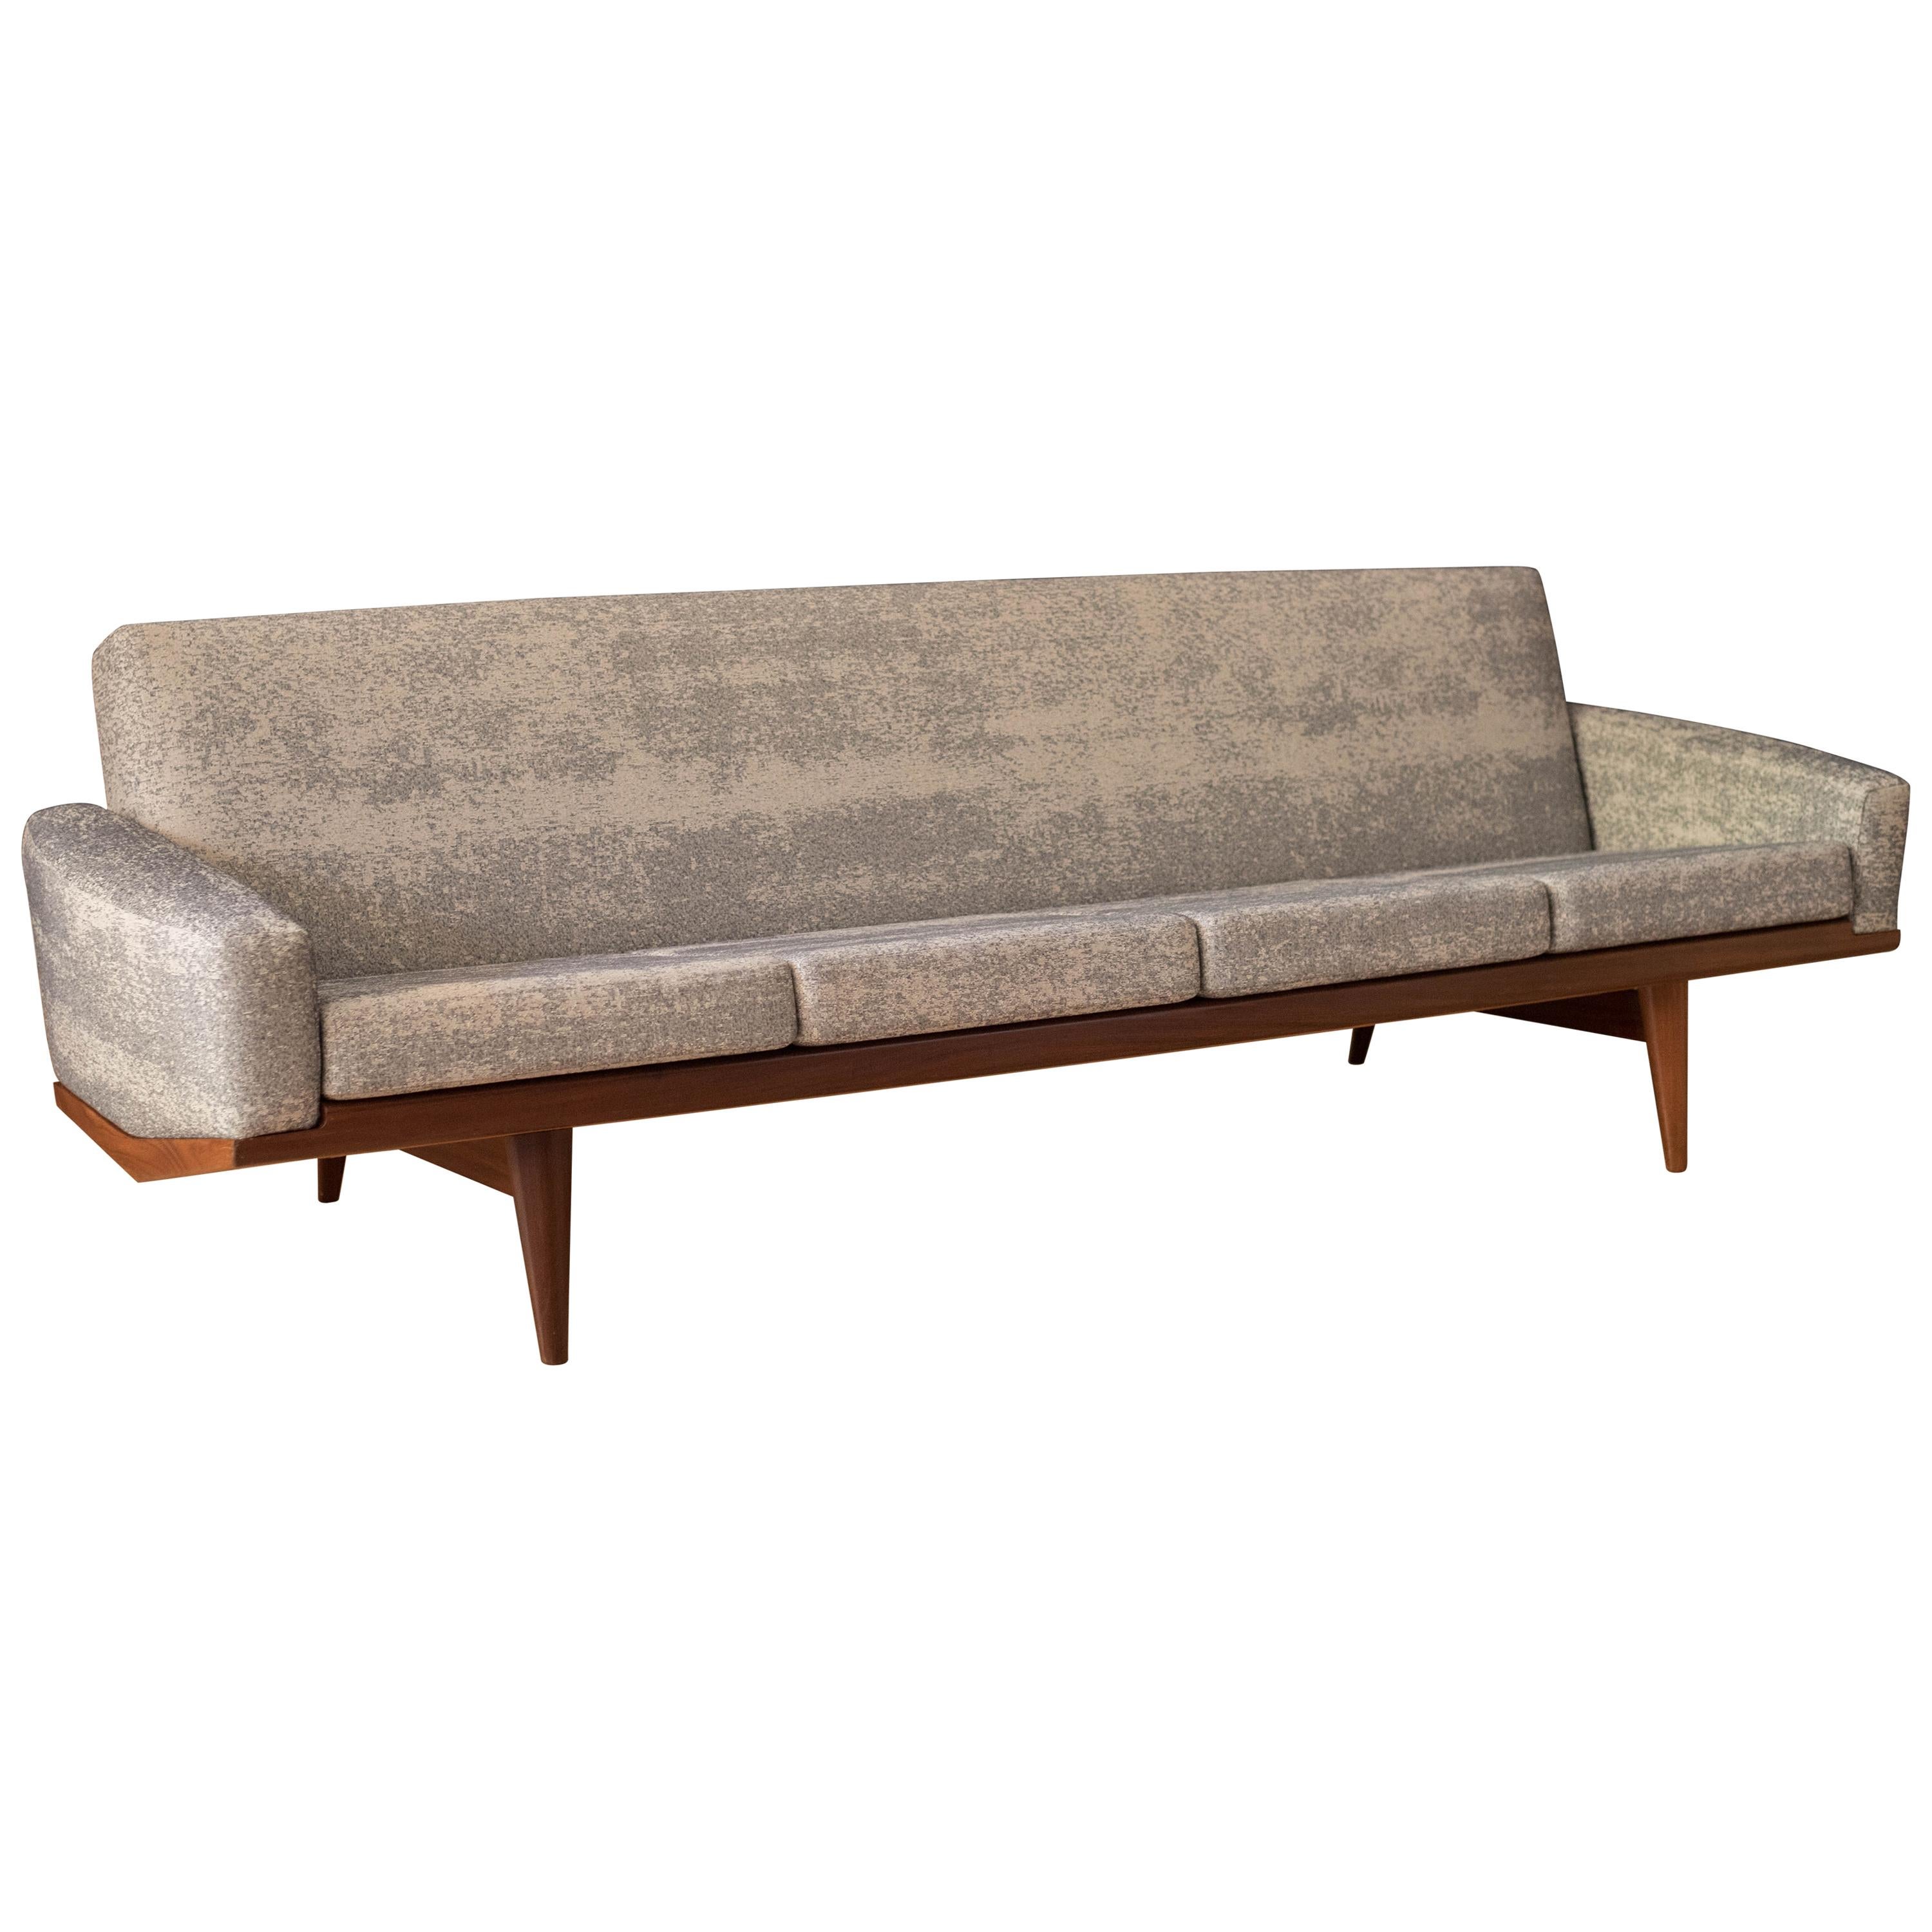 Mid-Century Modern four-seat sofa designed by H.W. Klein for N.A. Jørgensens Møbelfabrik, Bramin. This statement piece features a sculptural teak frame that displays well from all angles. Cushions are supported by original sinuous springs throughout